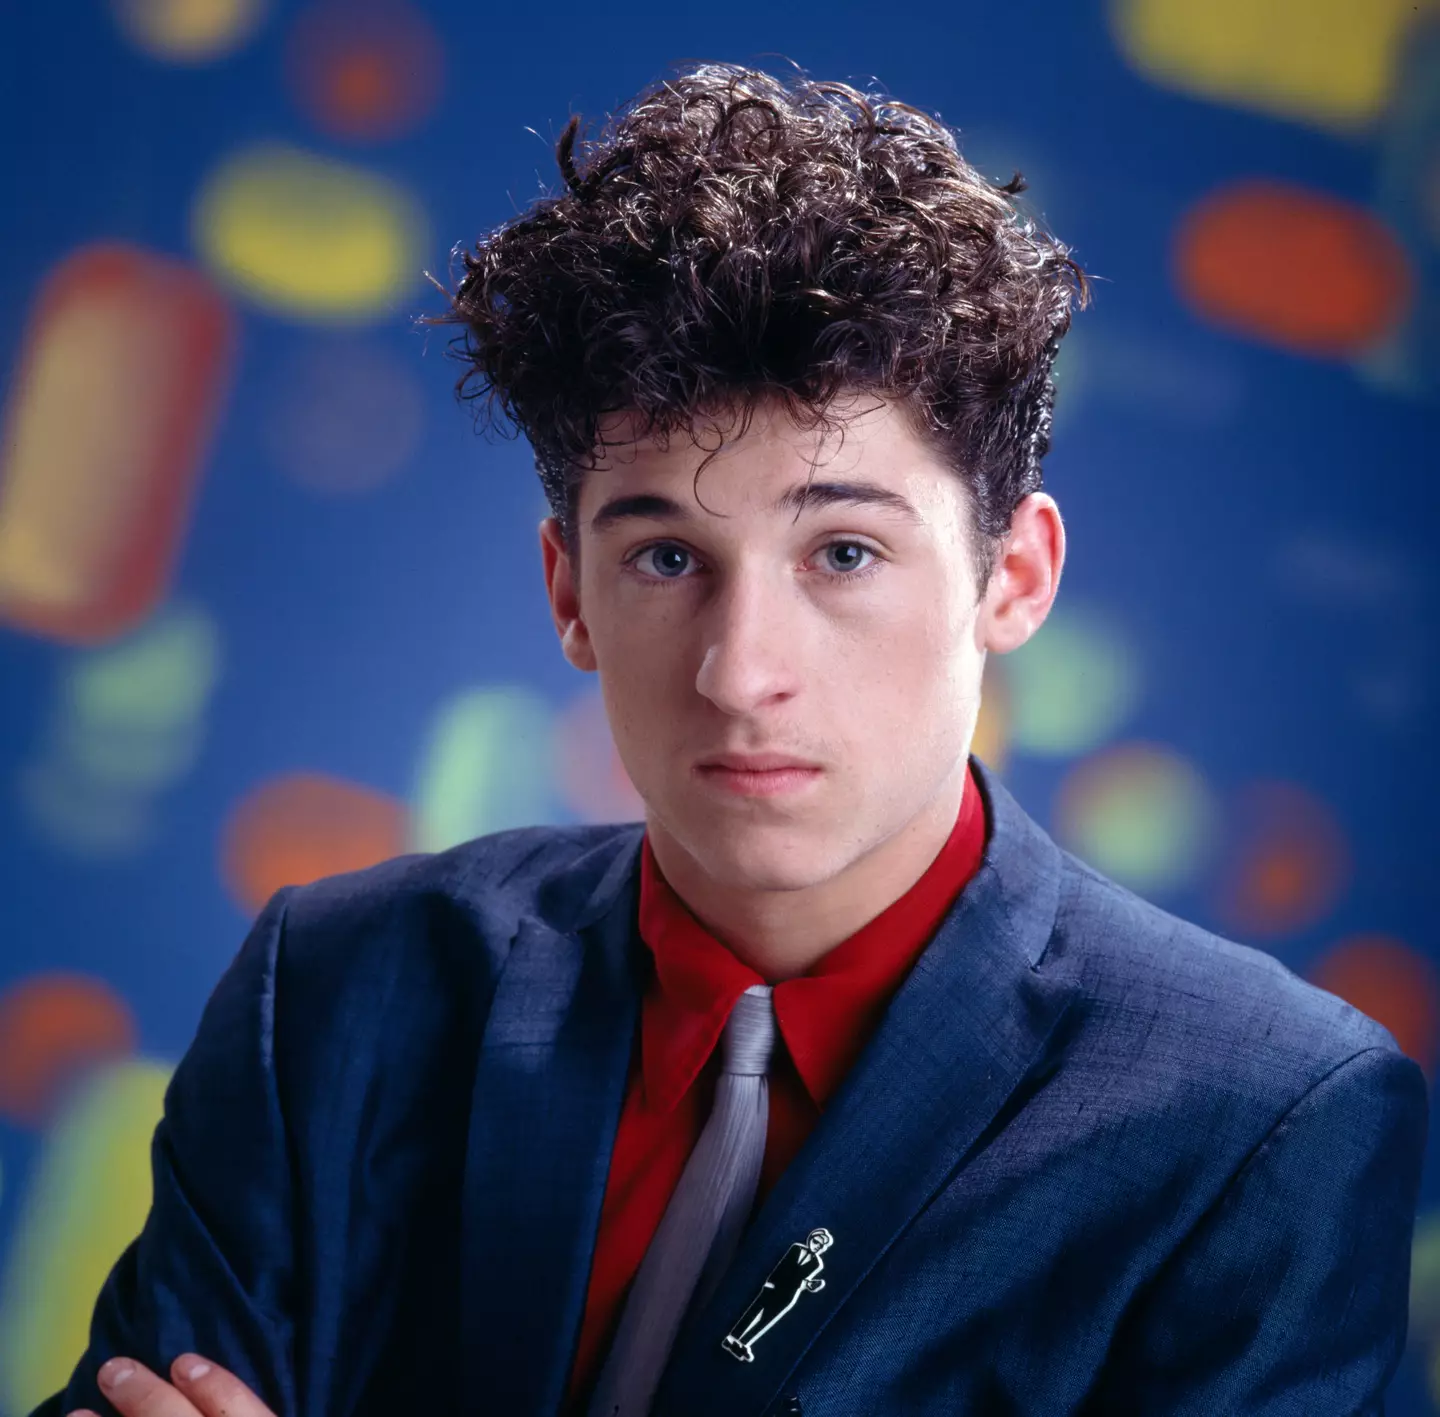 Patrick Dempsey in 1986.